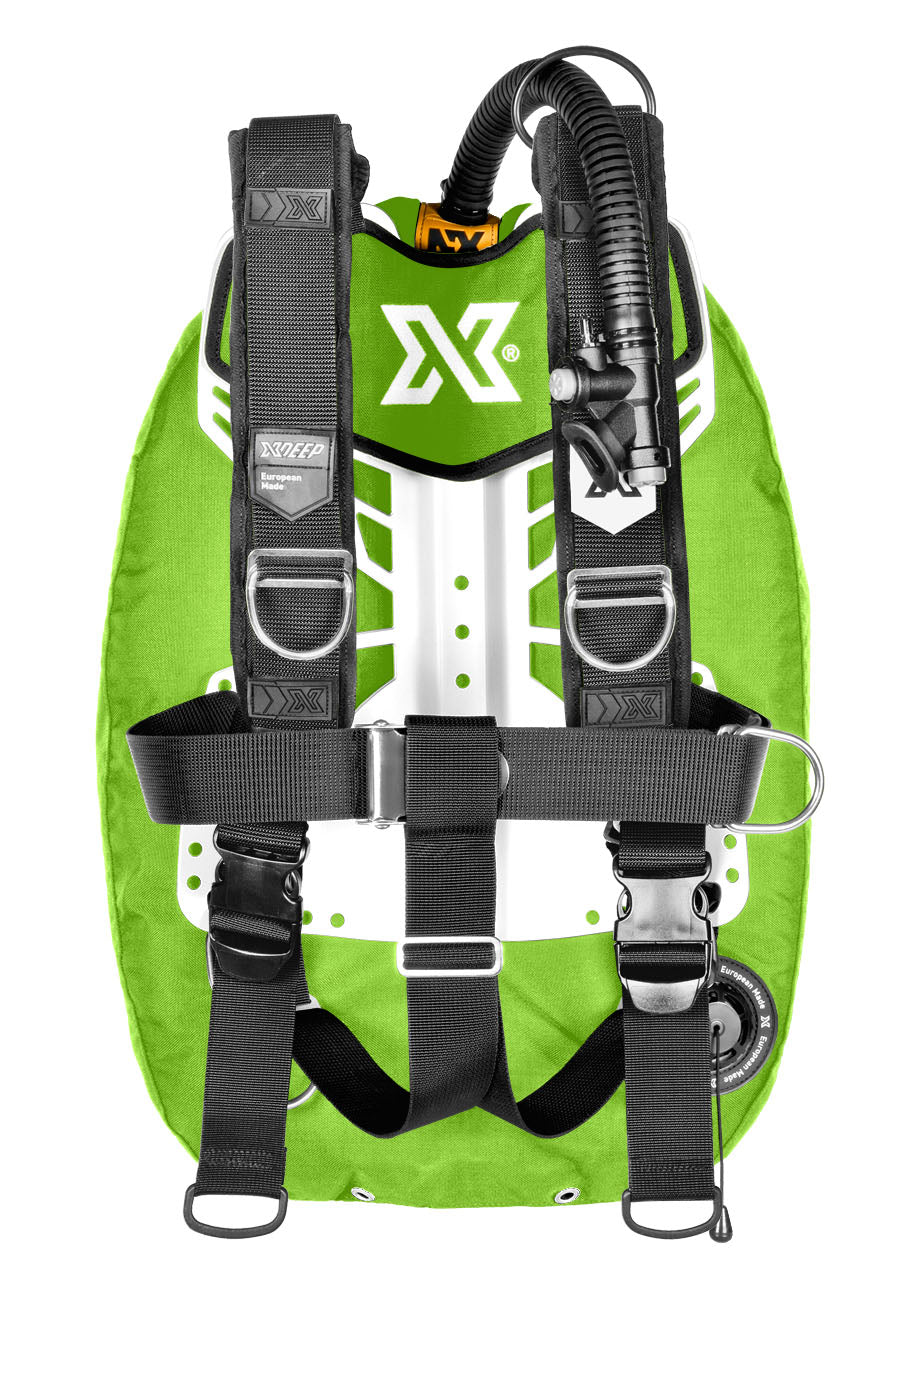 XDEEP XDEEP Zen Ultralight Wing System Deluxe / Small / Lime - Oyster Diving